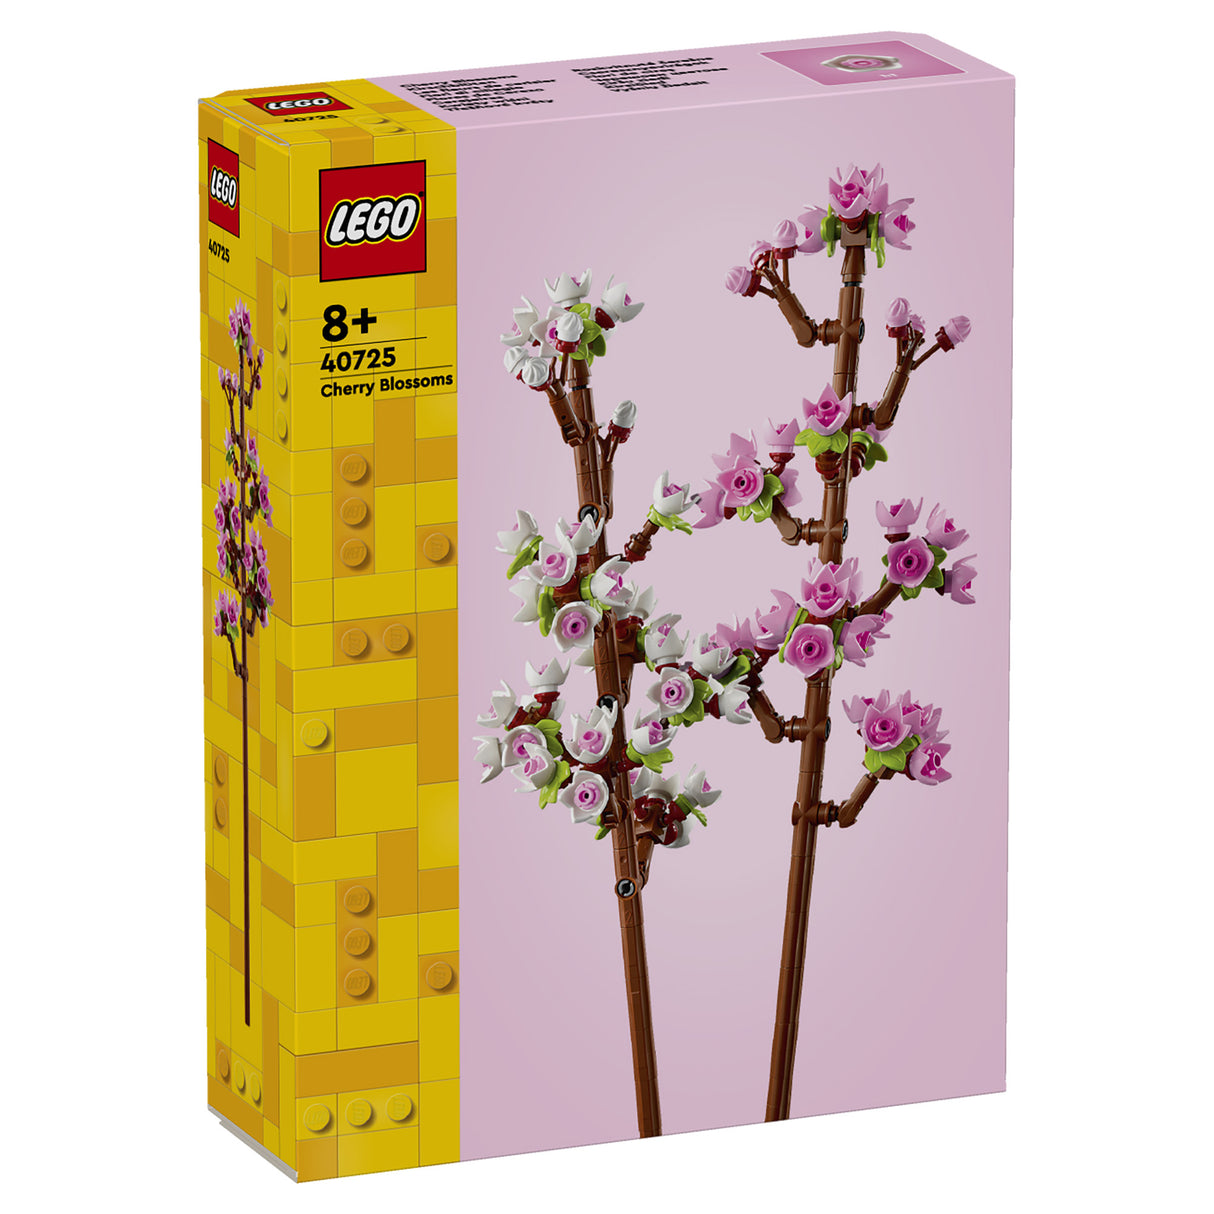 LEGO Bontanical Collection Cherry Blossoms 40725, (430-pieces)